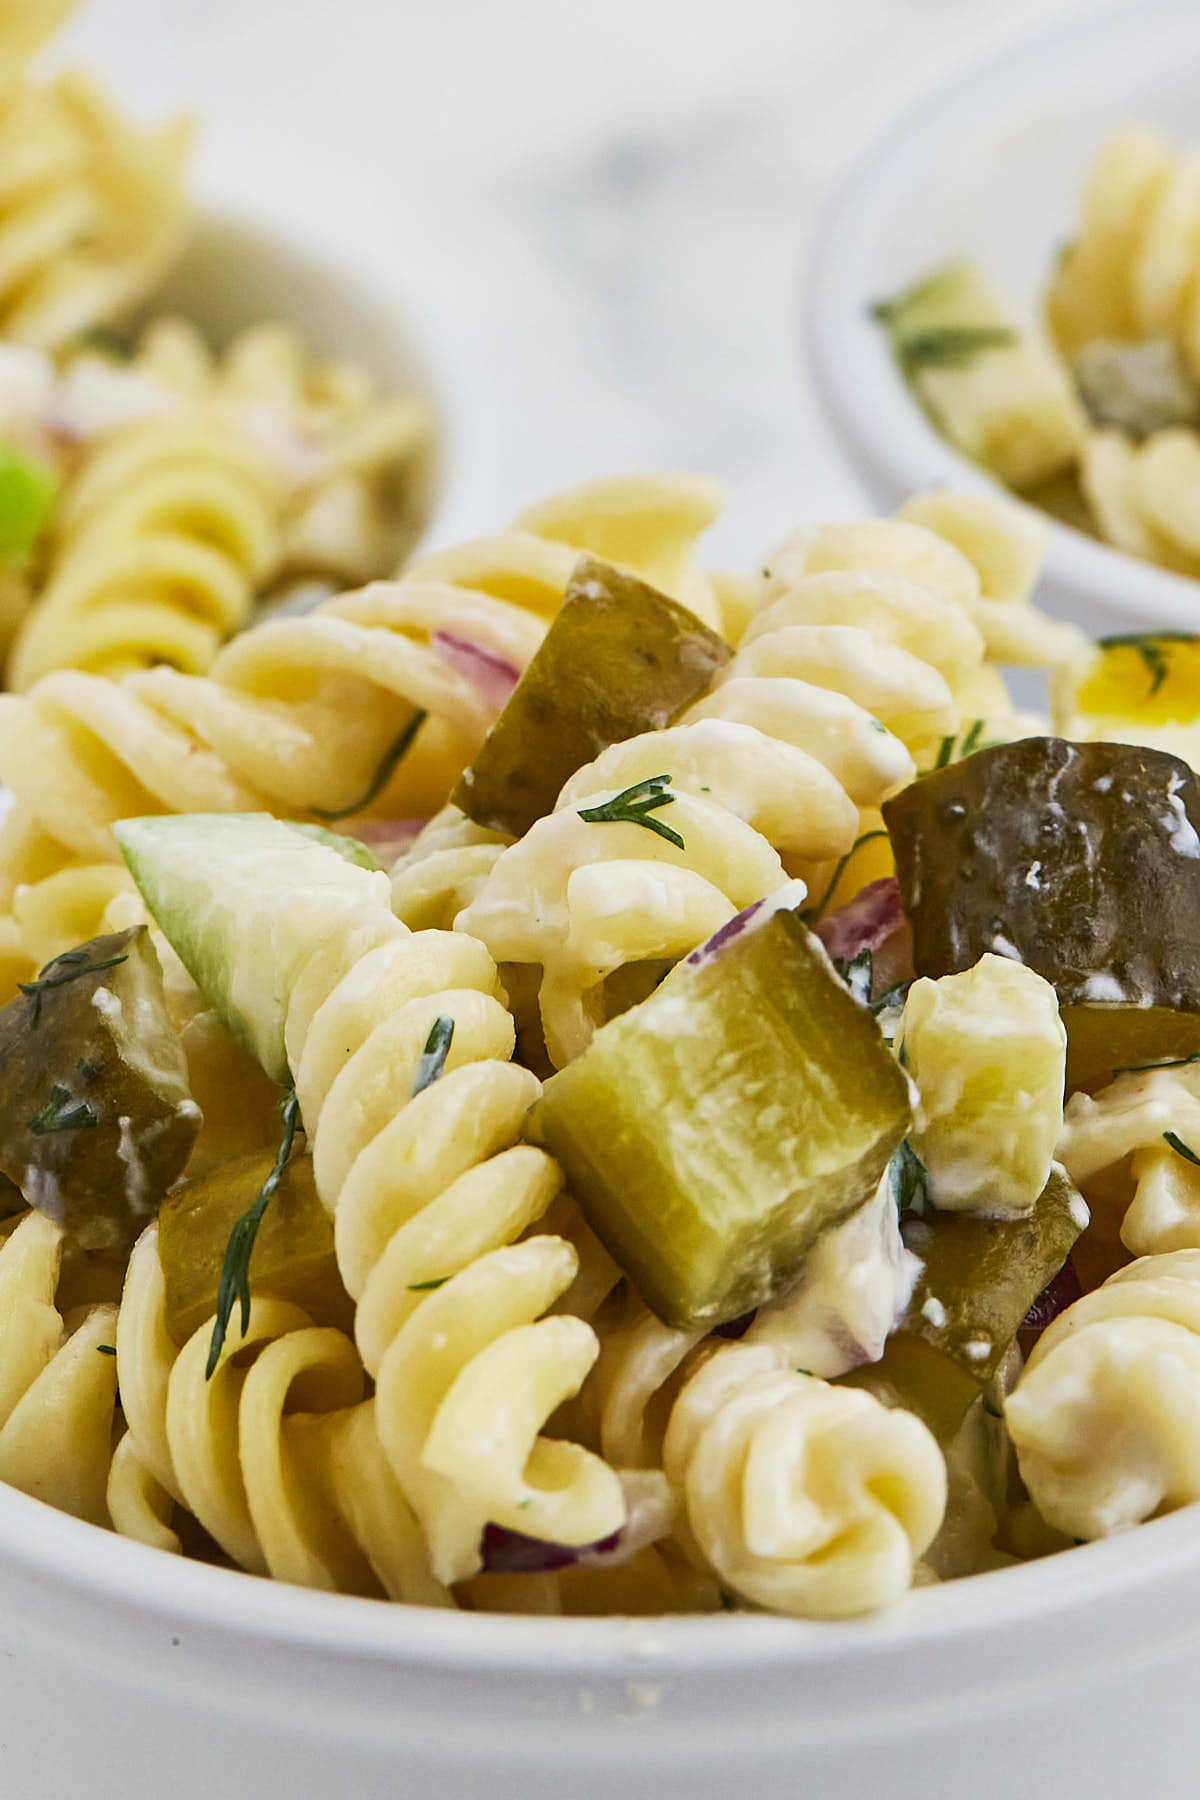 Dill Pickle Pasta Salad in serve in white salad dishes.